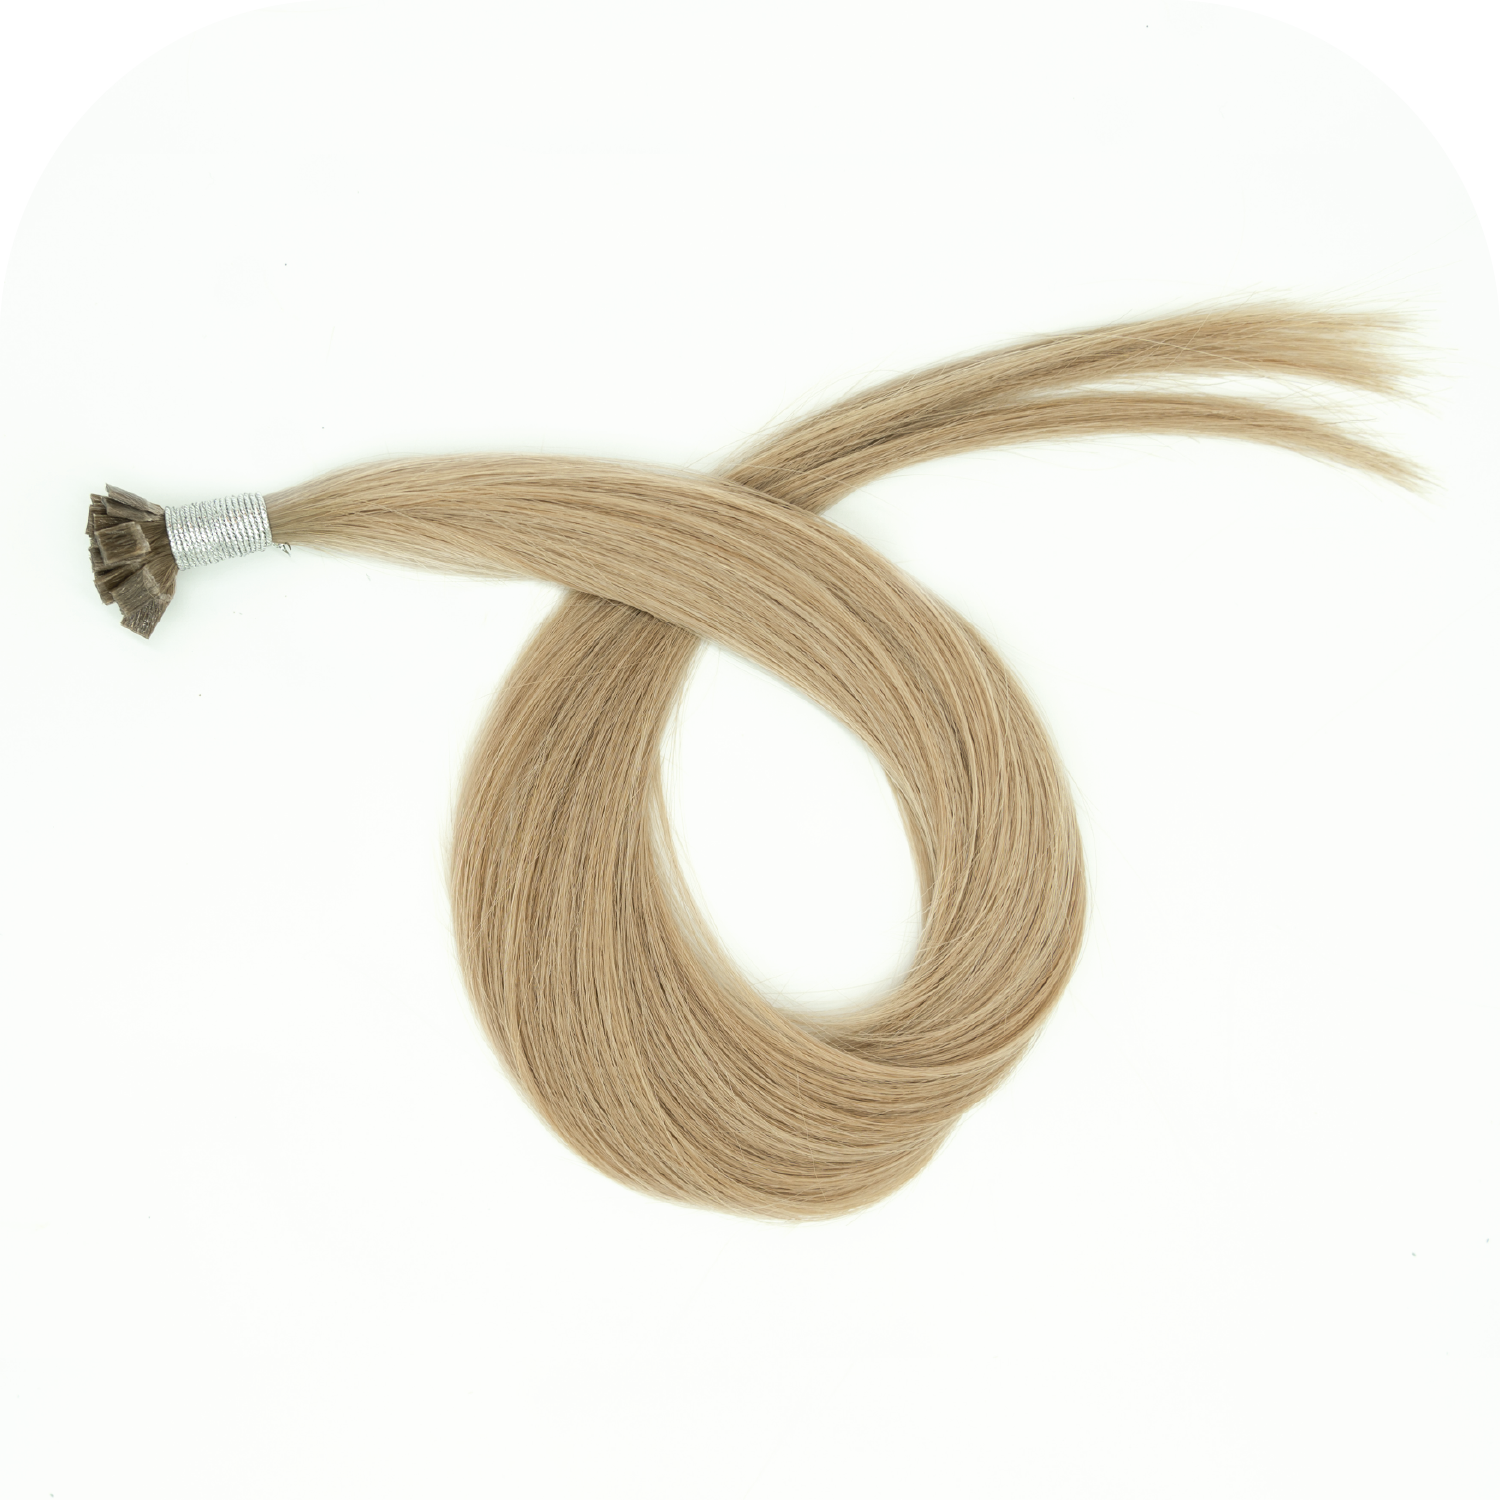 Couture Hair Co. Couture Top or K Tip Hair Extensions in Color Warm Blonde Mix #8/18/22